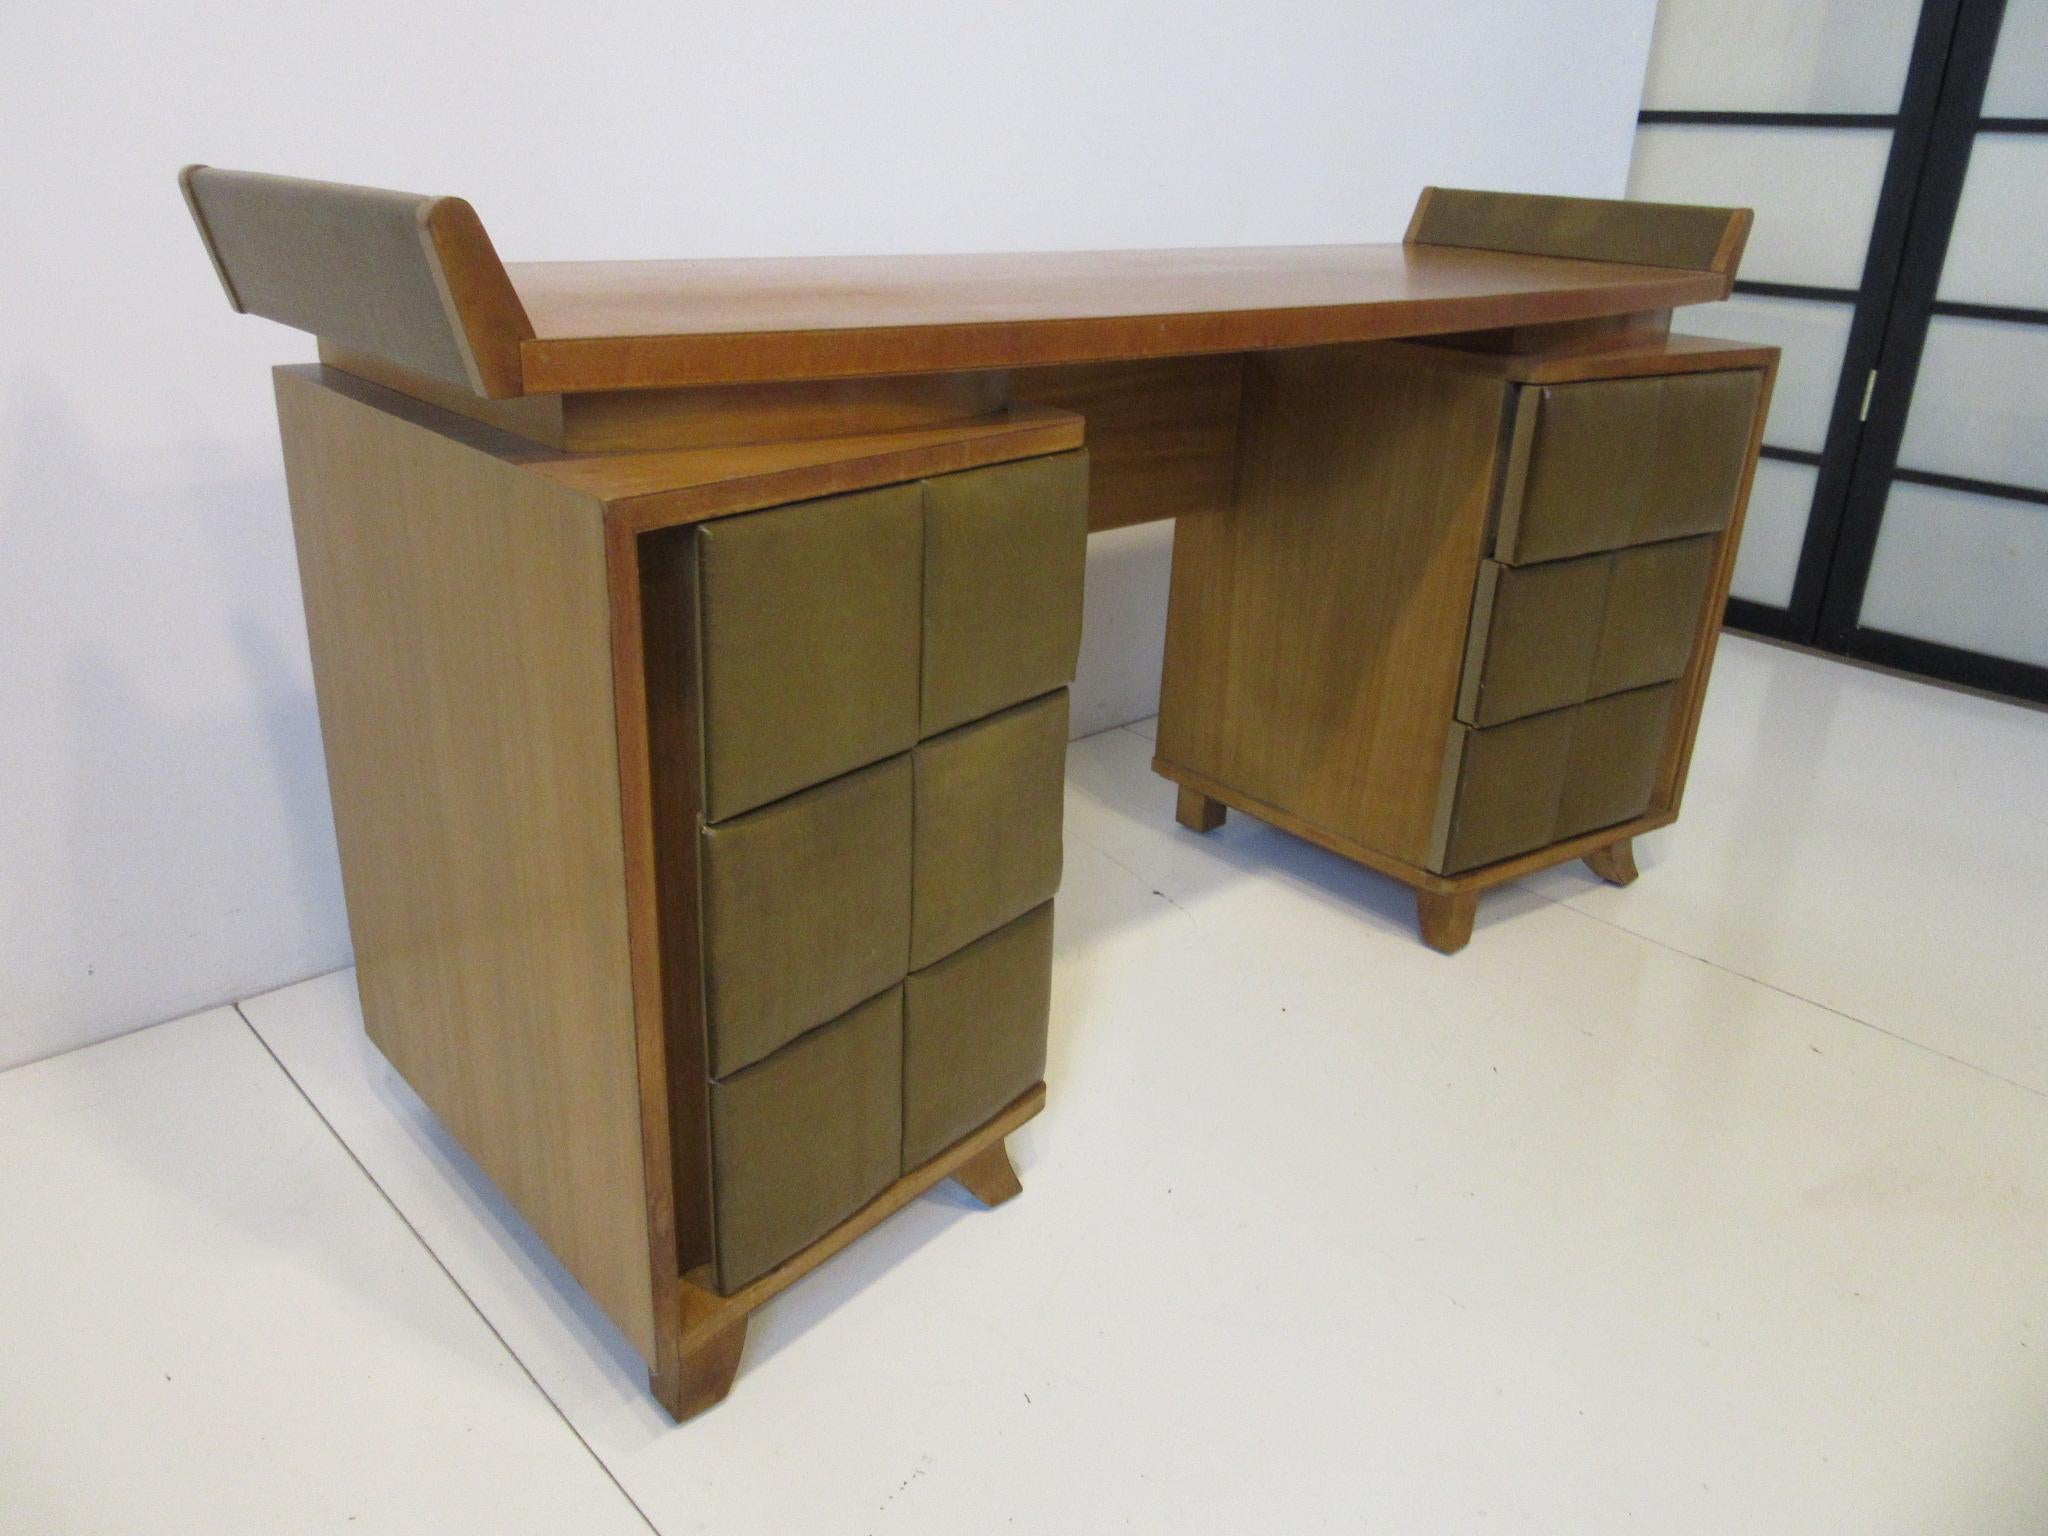 A early vanity or small desk with six angled leatherette padded drawers, floating top design and upturned angled sides with leatherette. Sitting on flared legs the piece is in a dark honey colored mahogany, well crafted by the Herman Miller